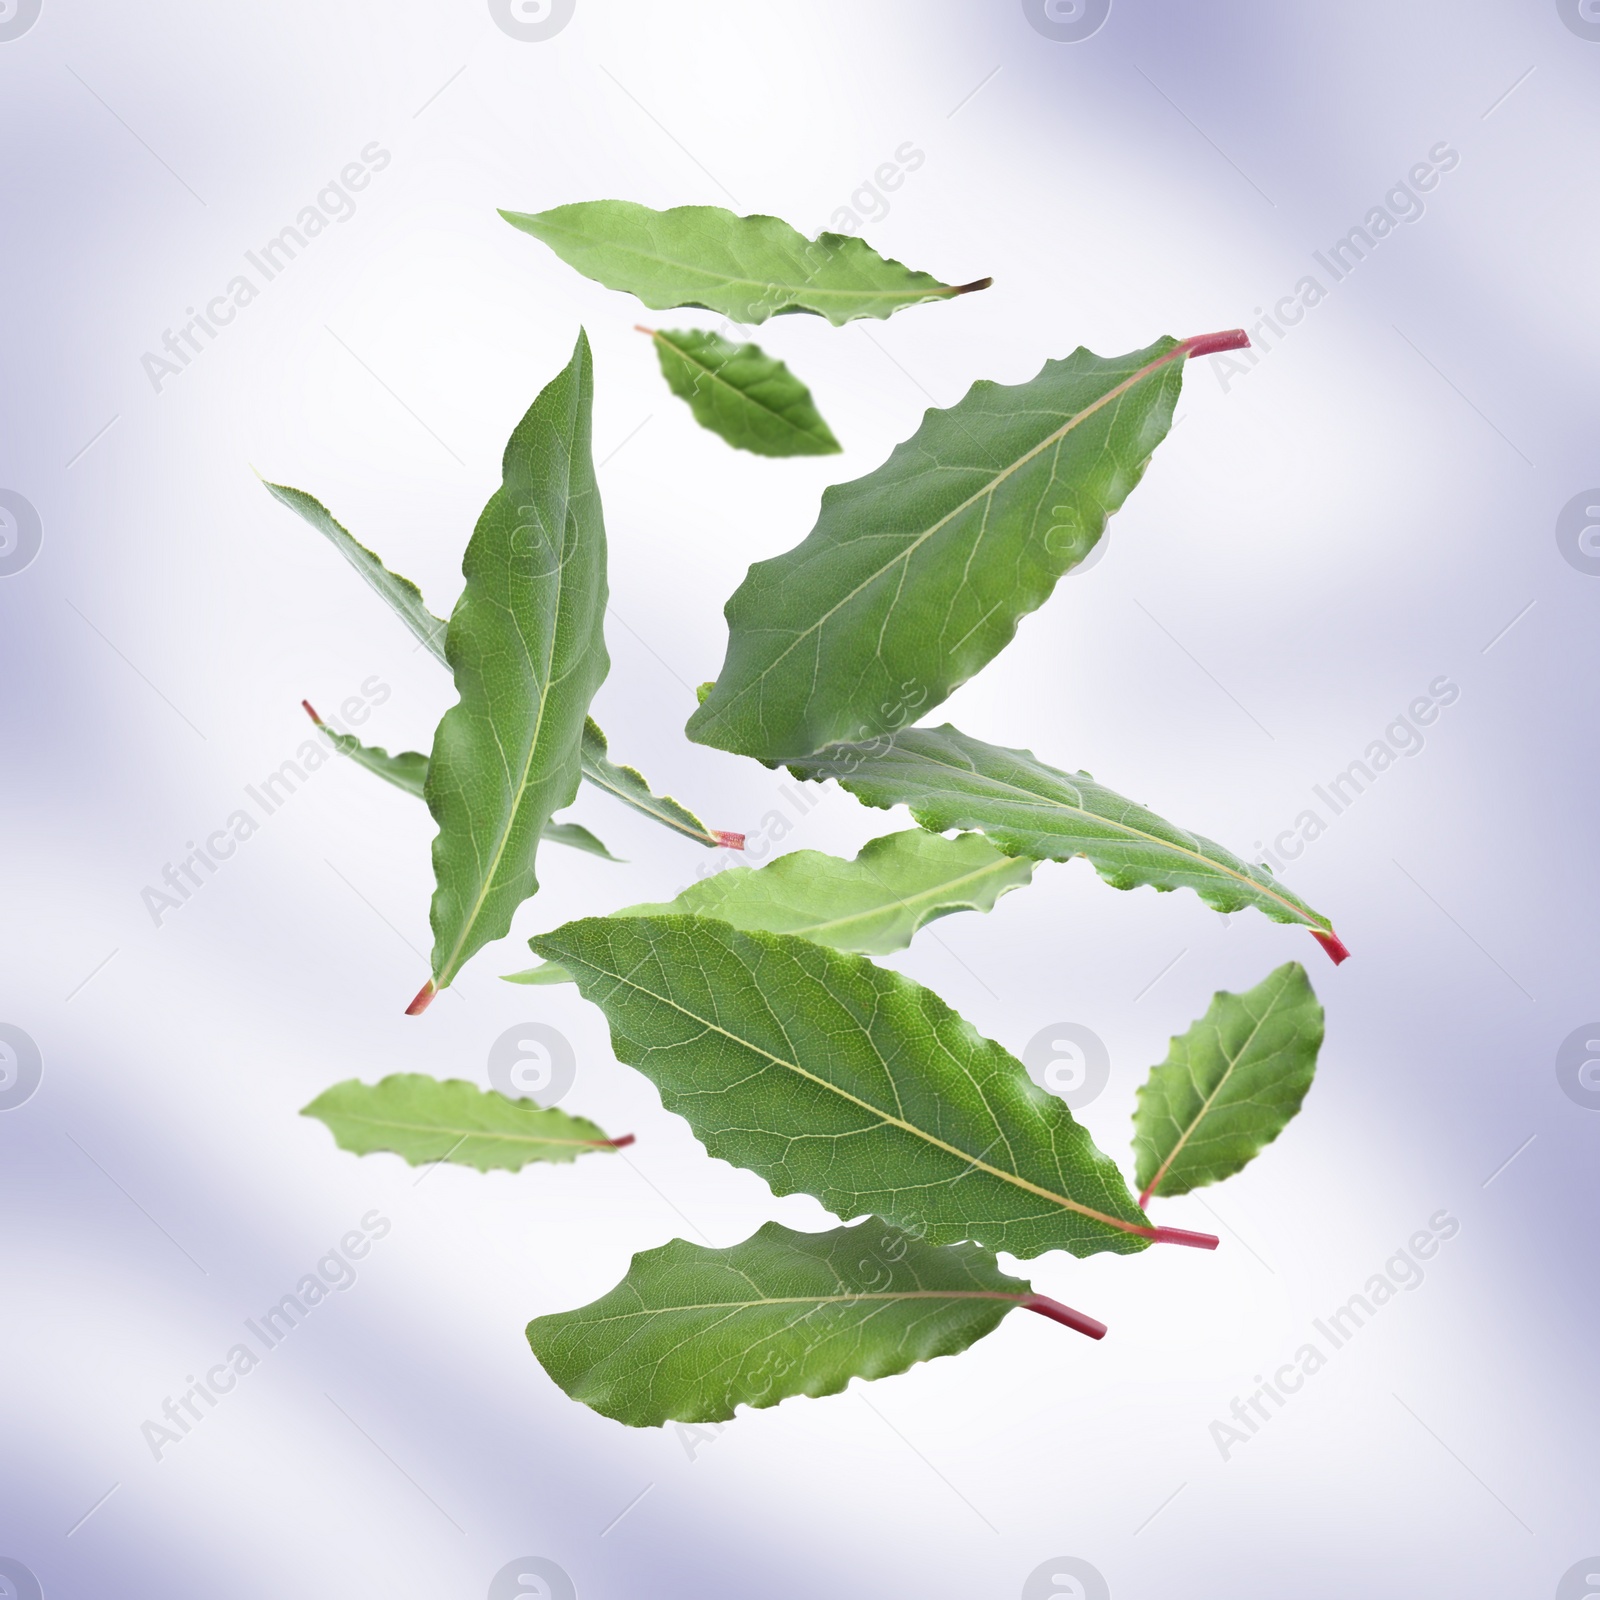 Image of Fresh bay leaves falling on color background